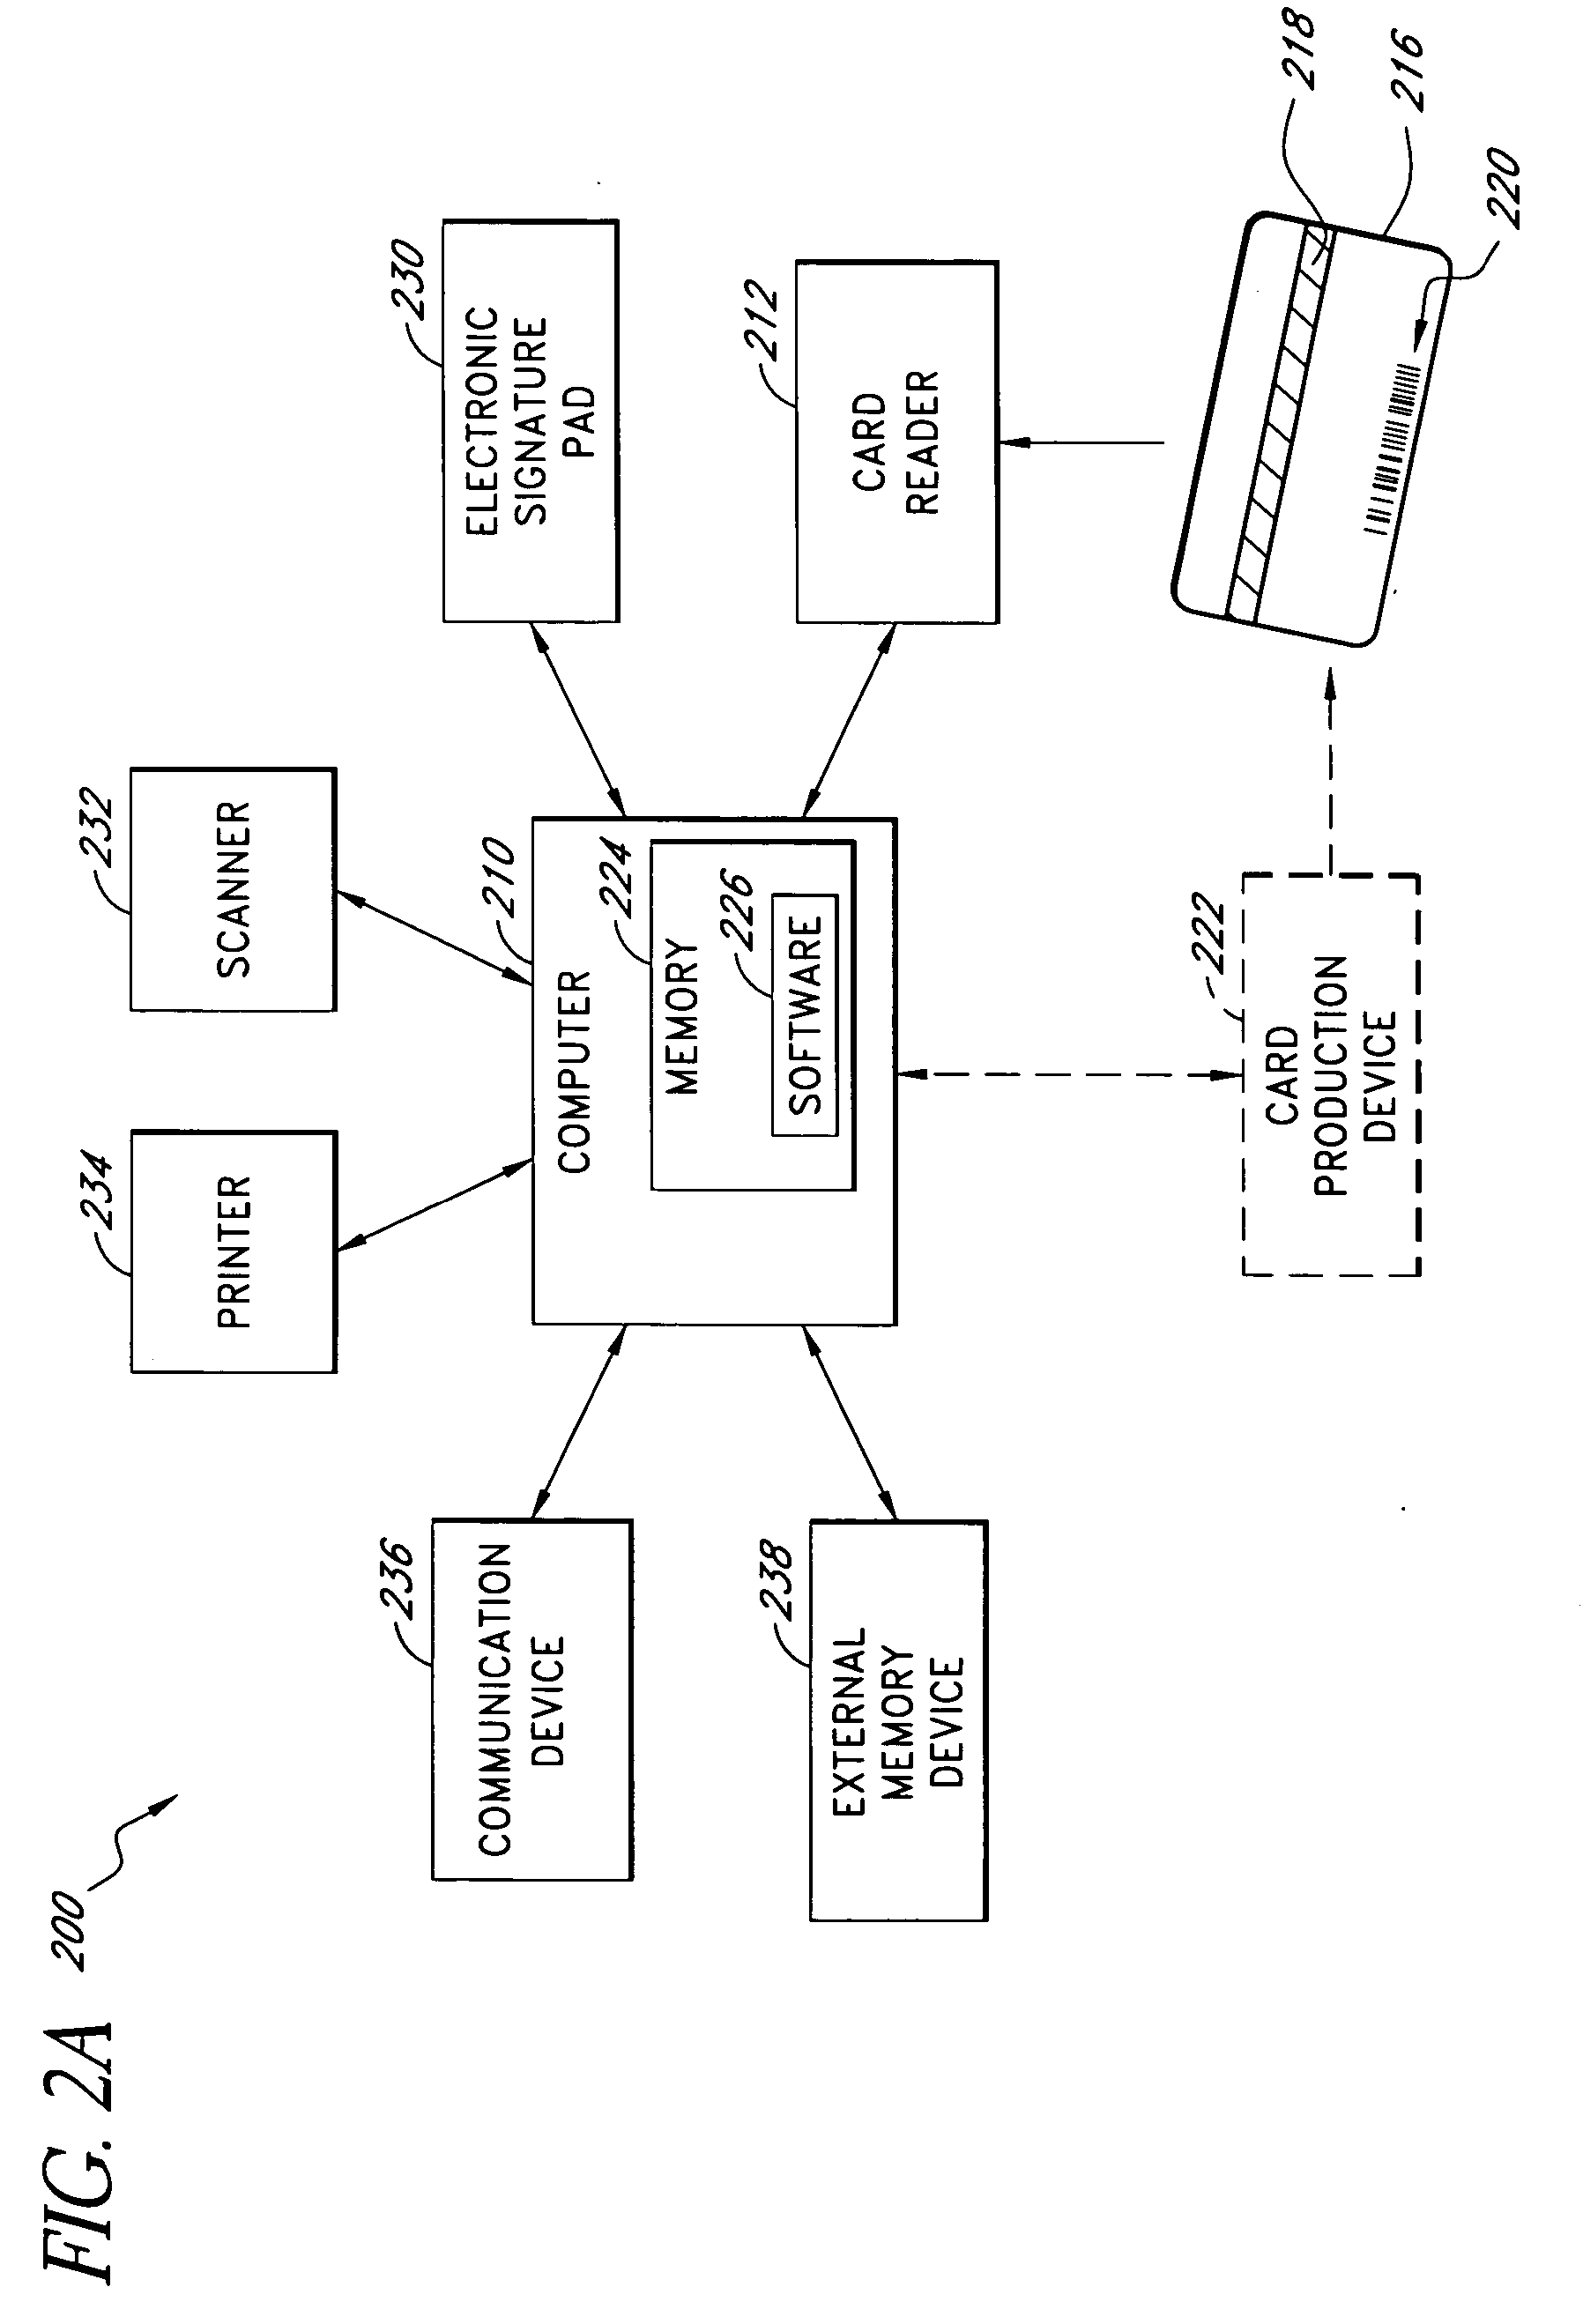 Systems and methods for automating the capture, organization, and transmission of data